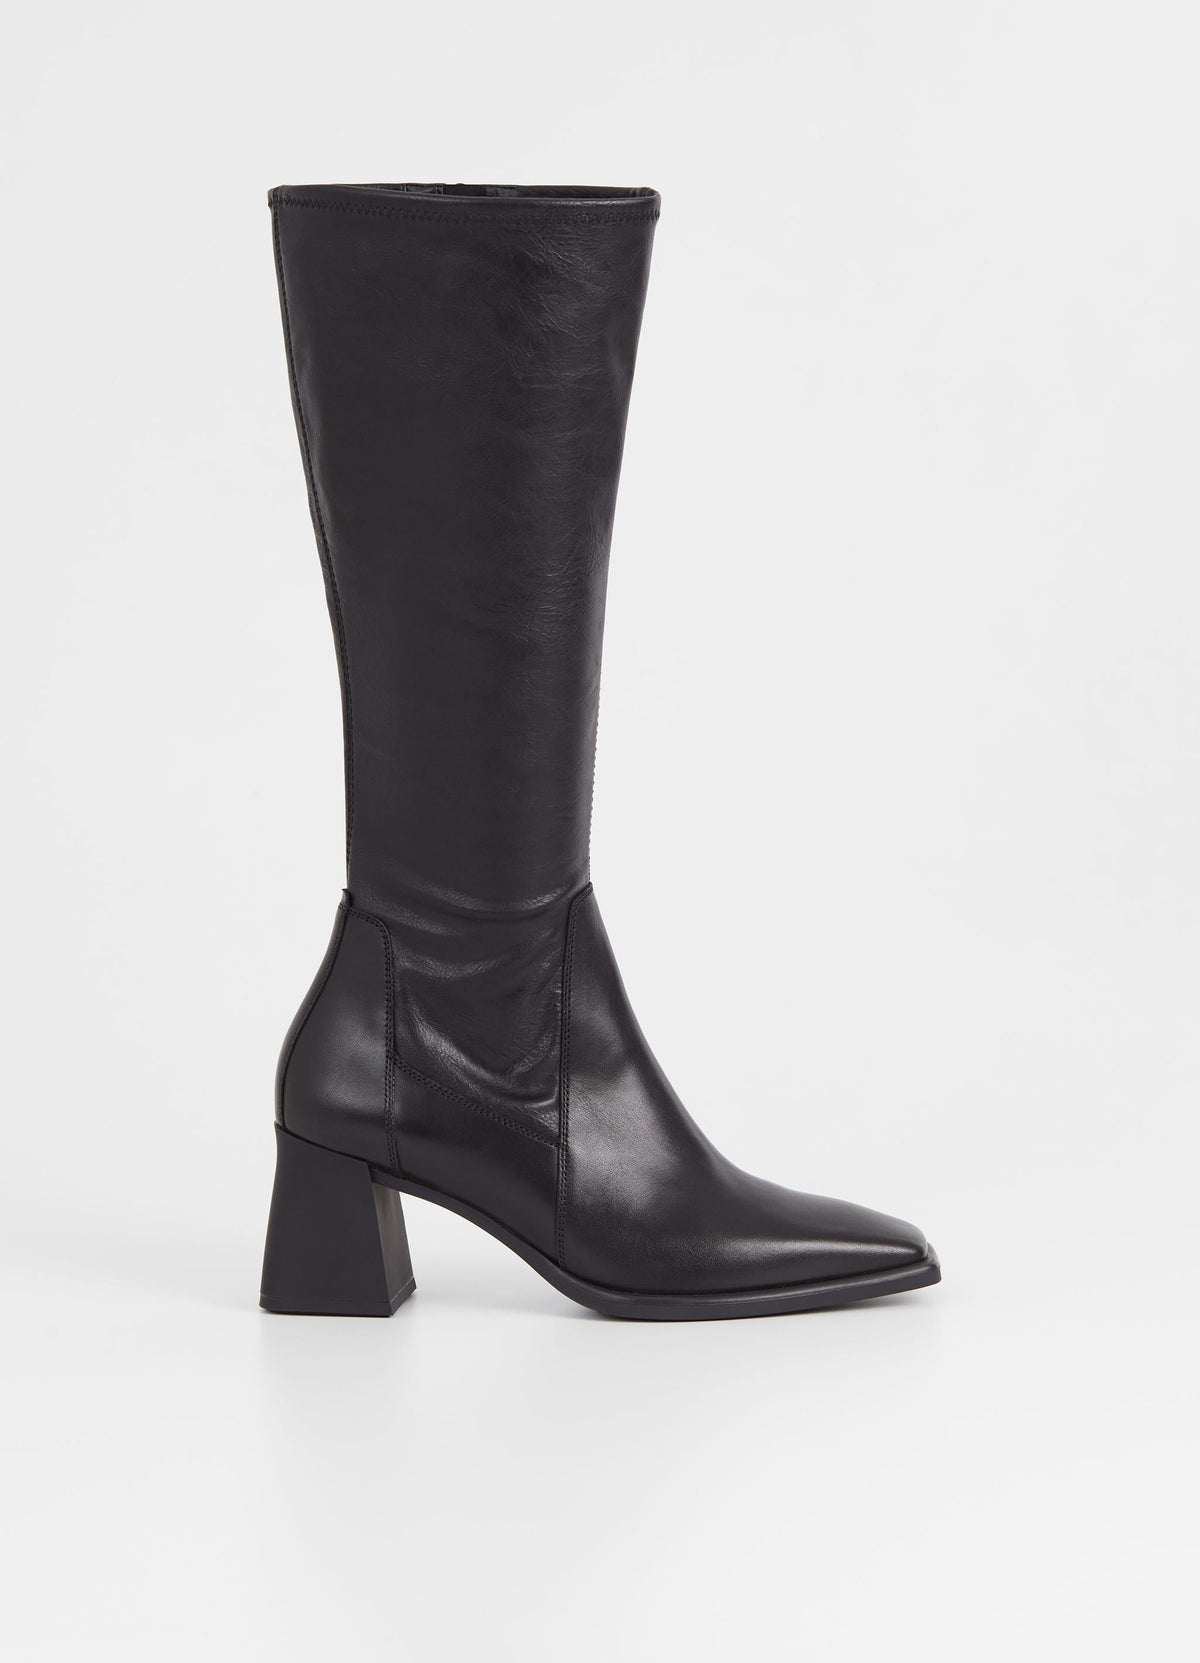 Tall black leather boot with flared block rubber heel and inside zip fastening